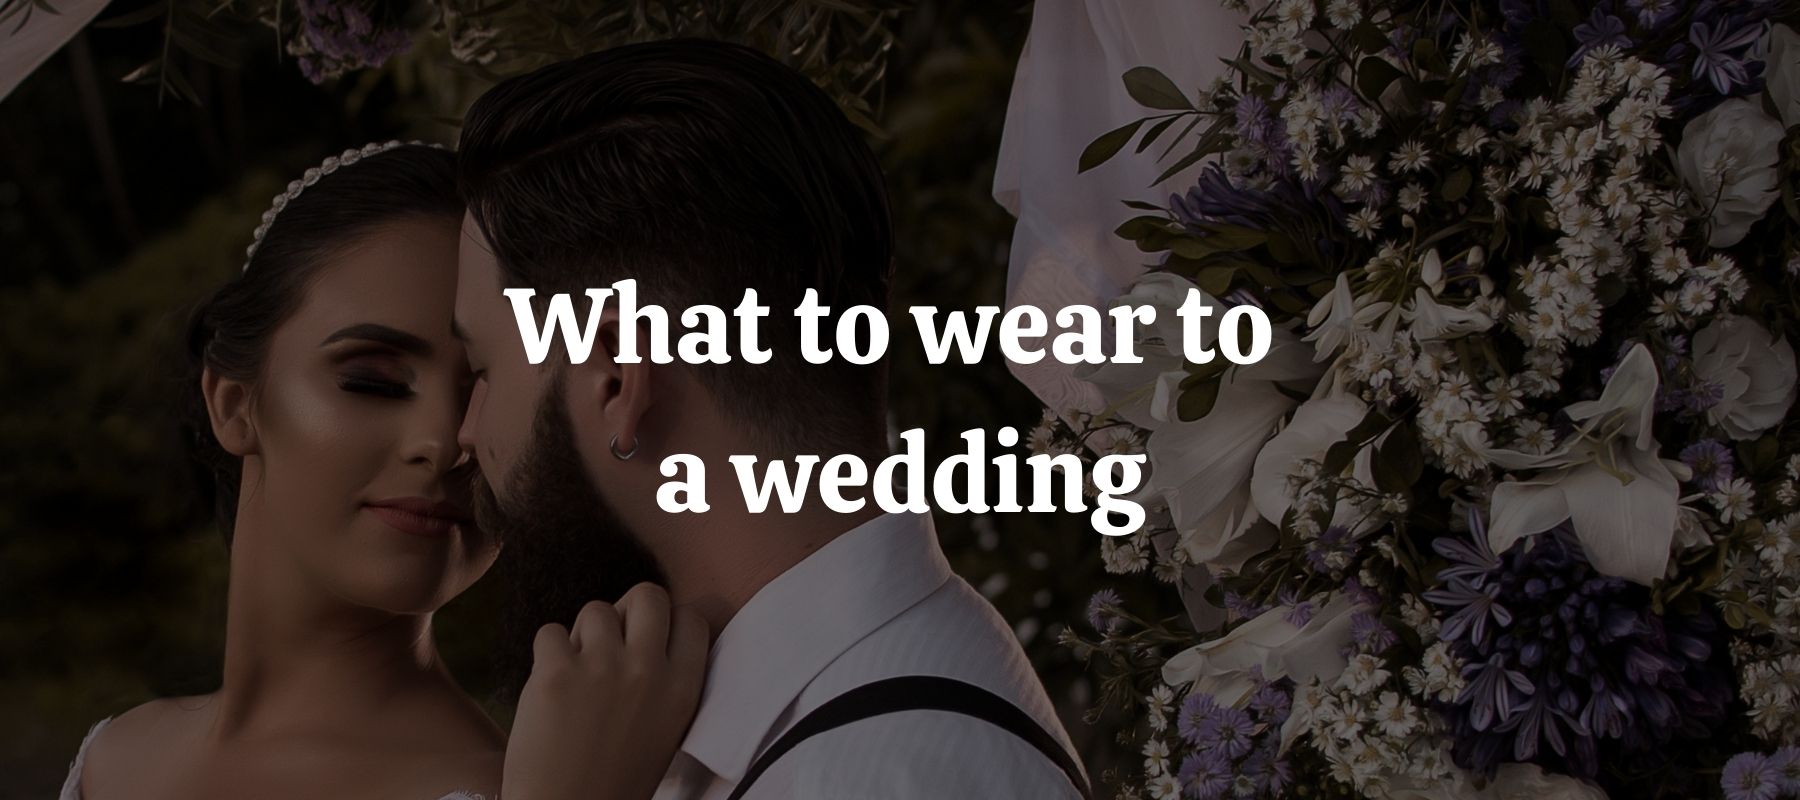 What to wear to a wedding